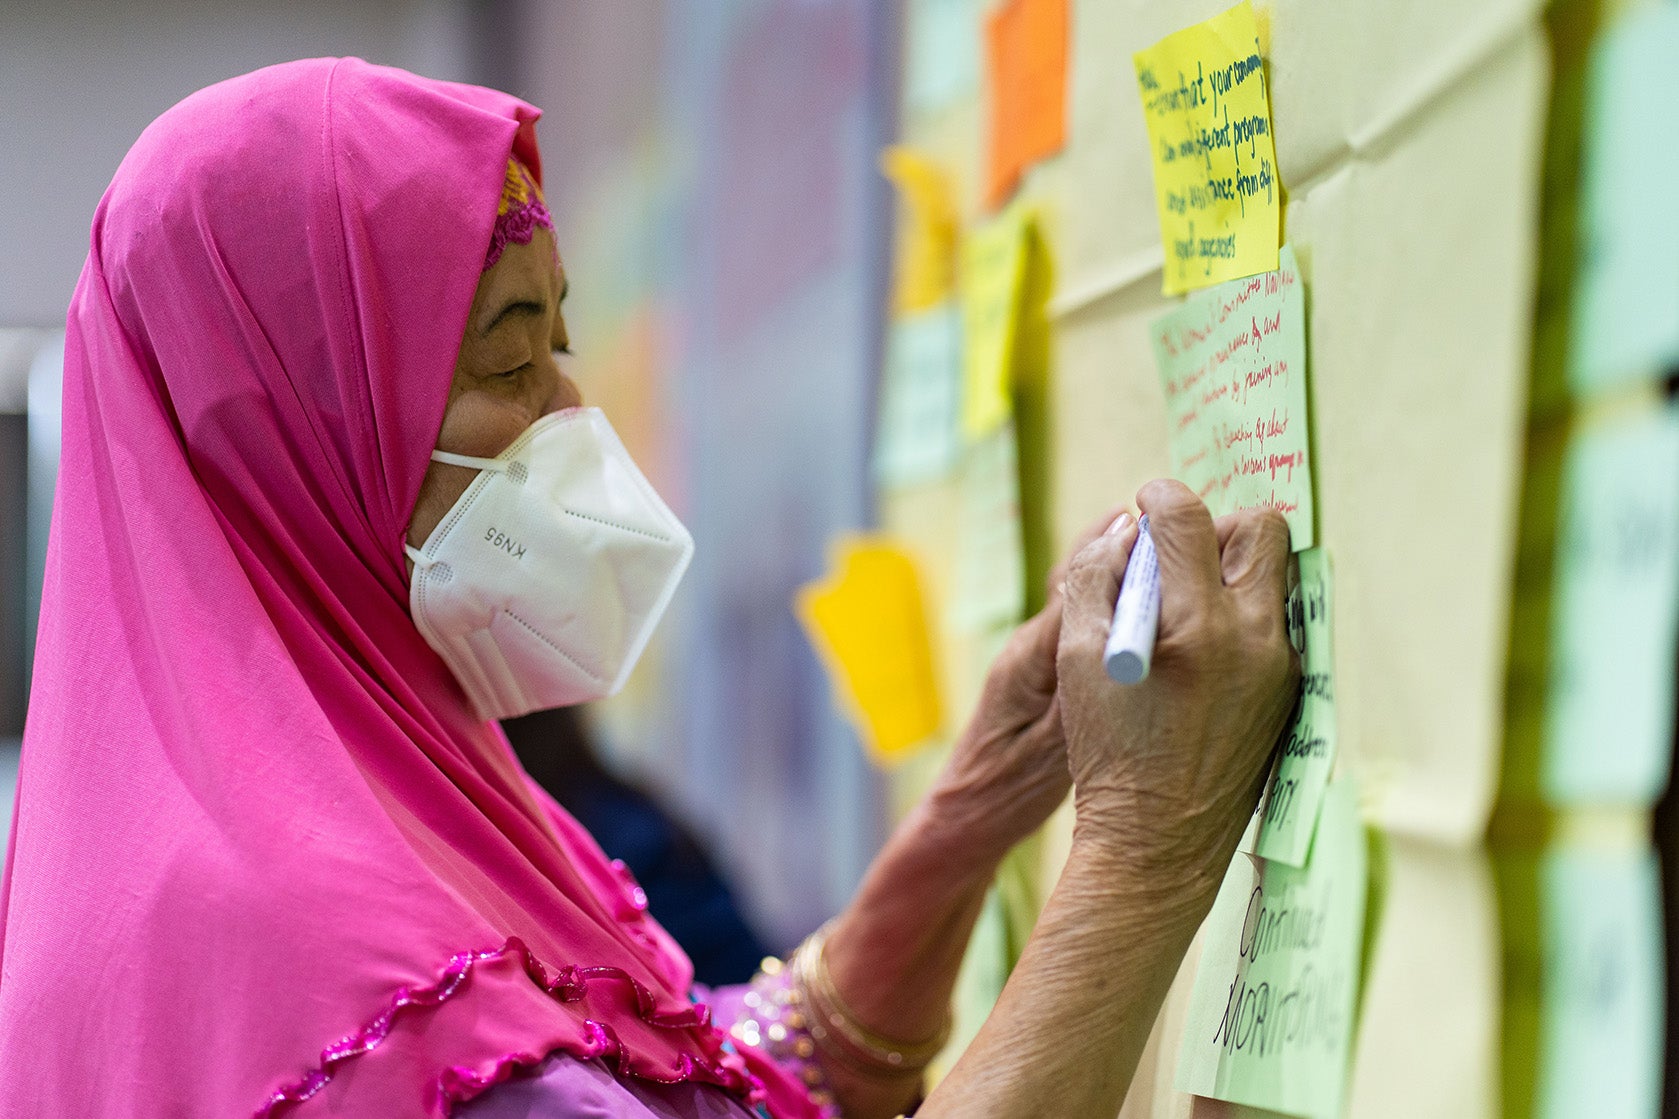 Diana Musa, a senior leader of the women’s committee of the MNLF, a former insurgent group, expresses her thoughts at a UN Women training to strengthen leadership and the committee’s values and goals. This photo was taken in General Santos City, the Philippines, on 27 October 2021.